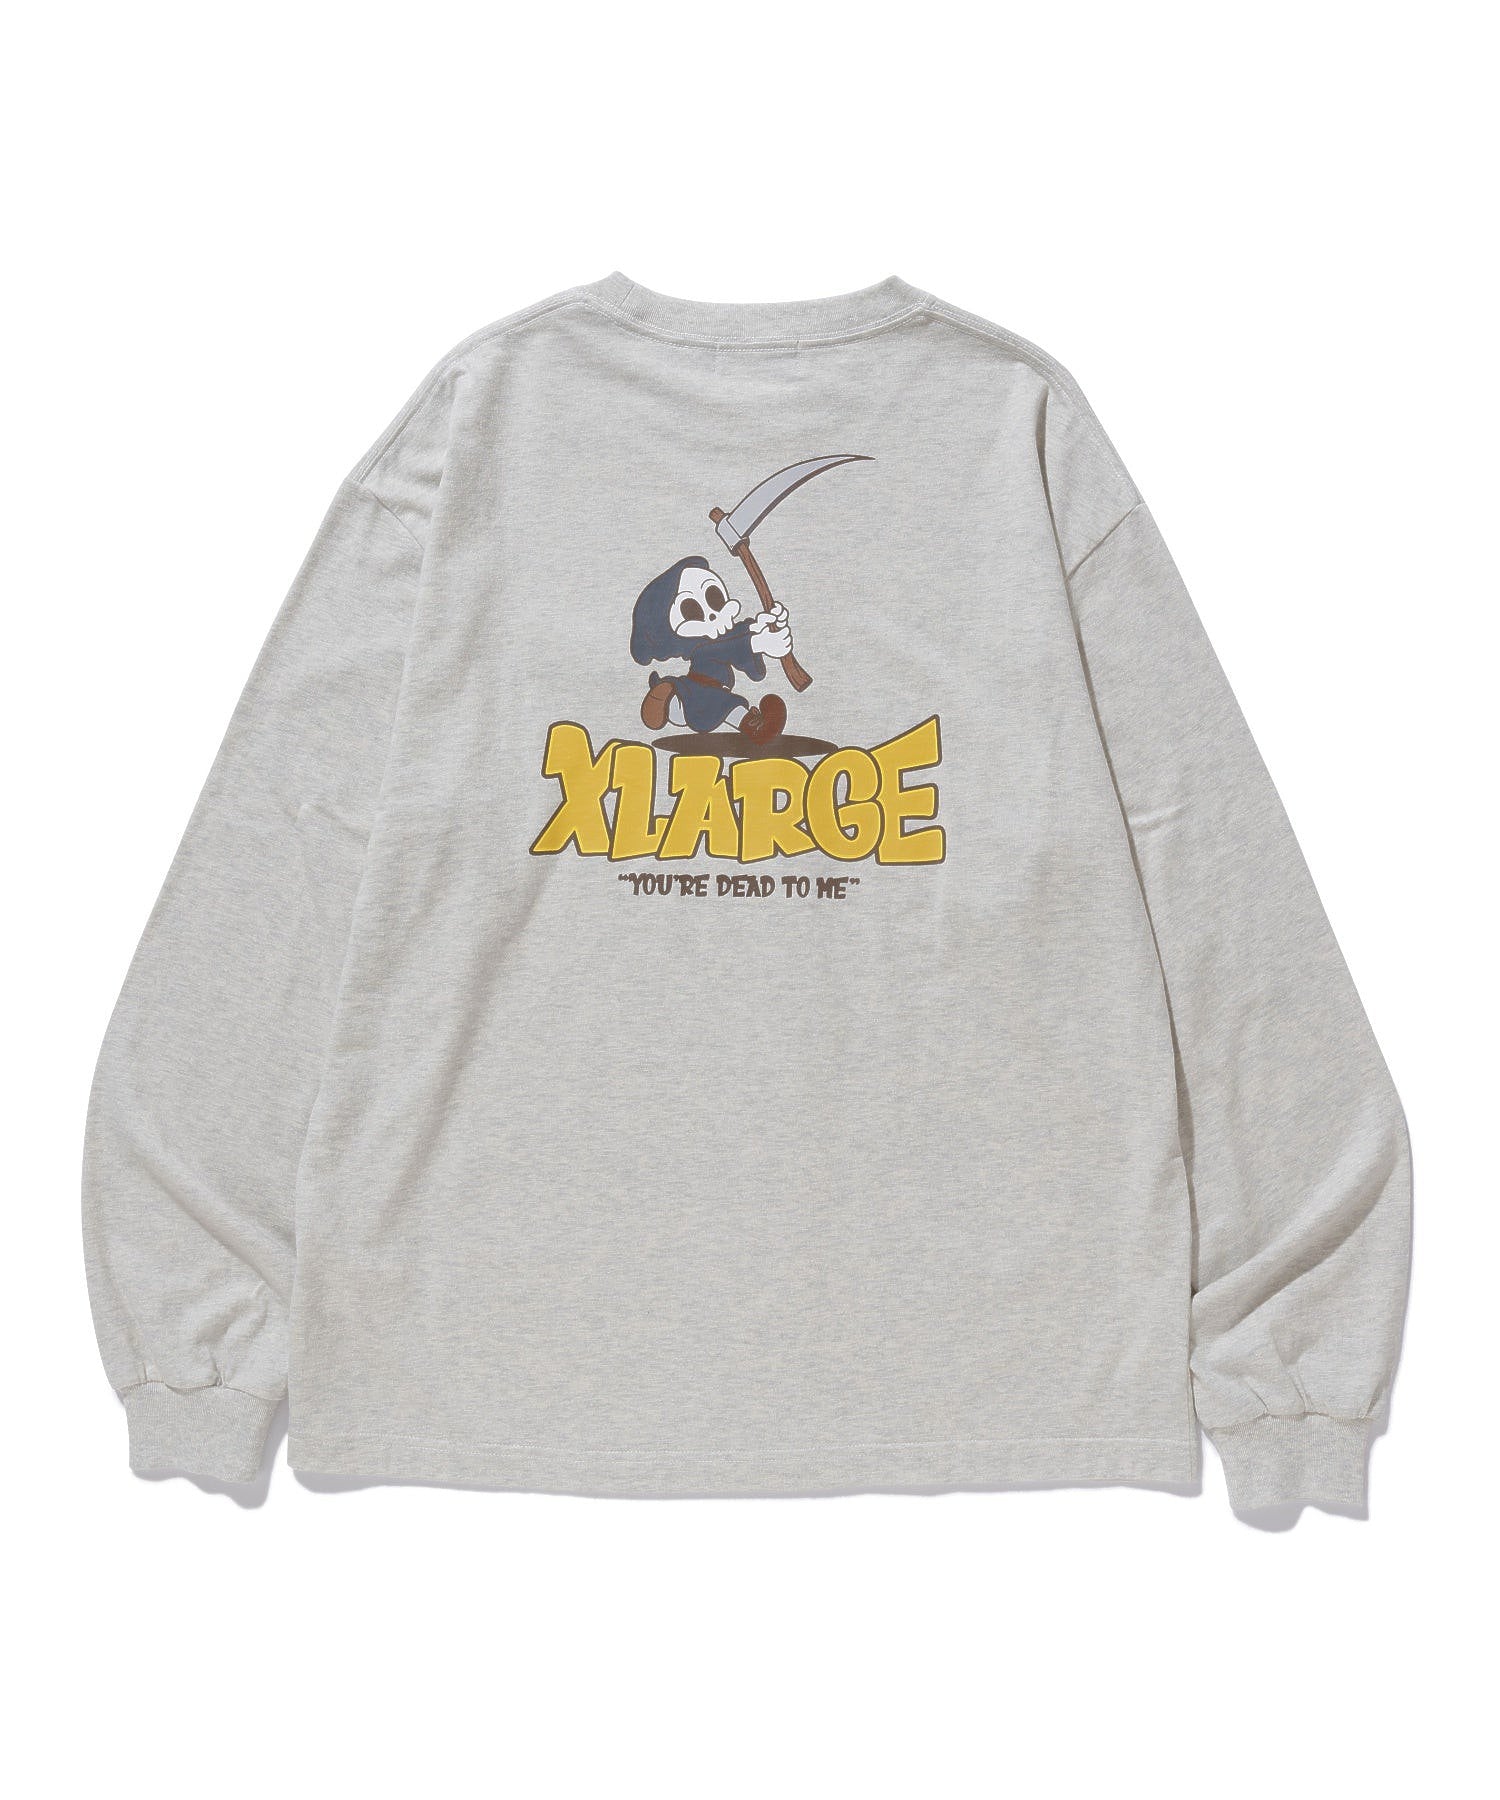 YOURE DEAD TO ME L/S TEE XLARGE